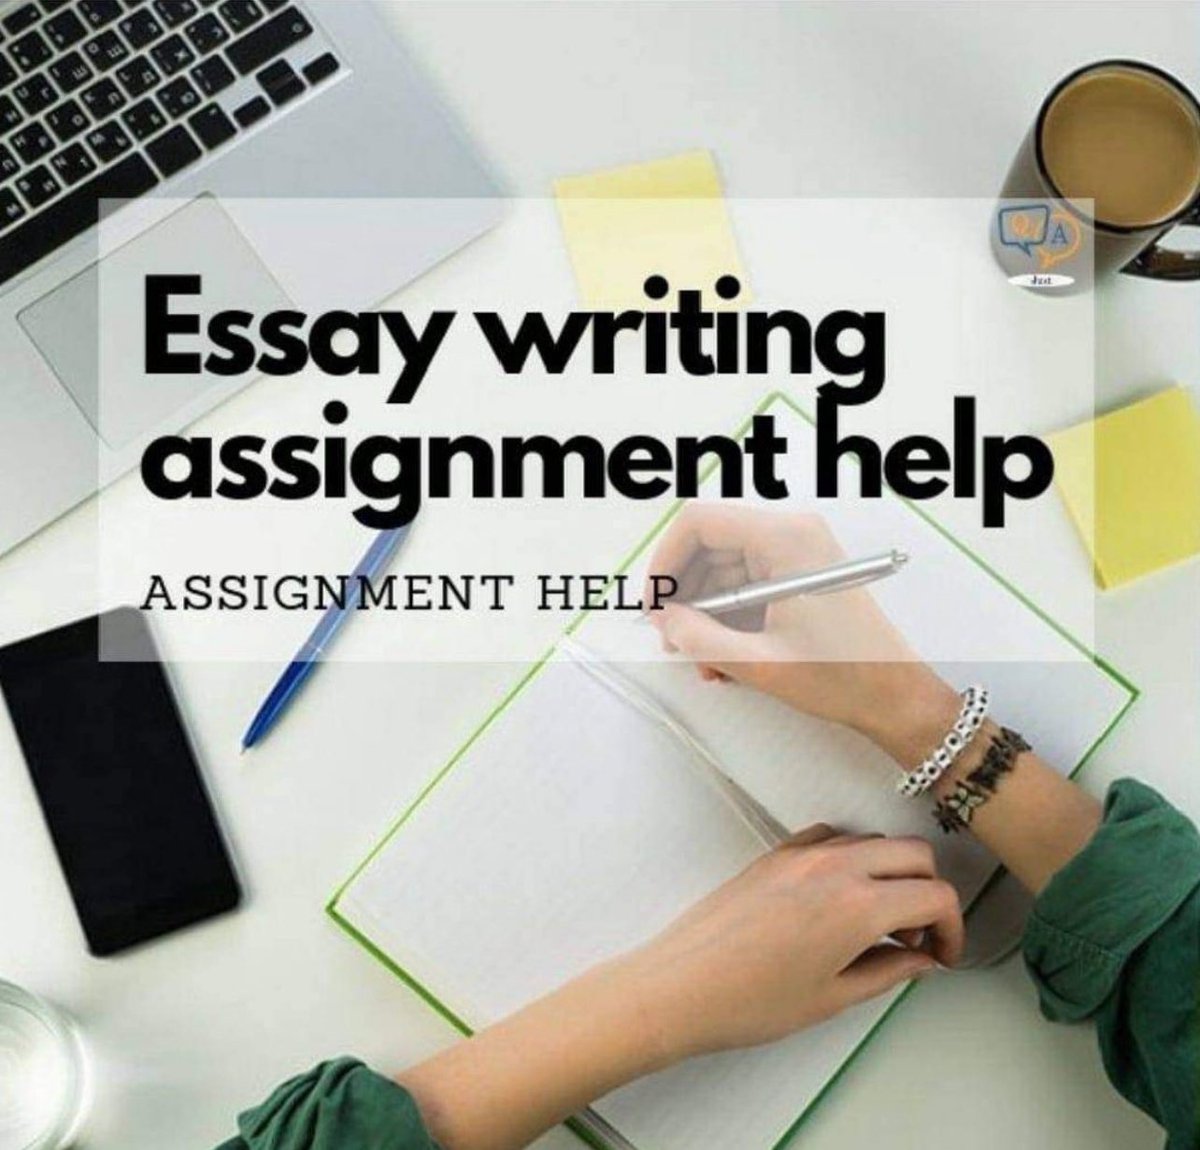 Don’t worry – we’ll be here all summer to help you out  ⭐️Assignment help 

#college #communitycollege #meme #collegelife #funny #relatablememe #education #dankmemes #essayhelp #essaywriting #homeworkhelp #AlbanyStateUniversity #ASUTwitter #asu #pv #PVL2023 #GramFam #pvamu #famu